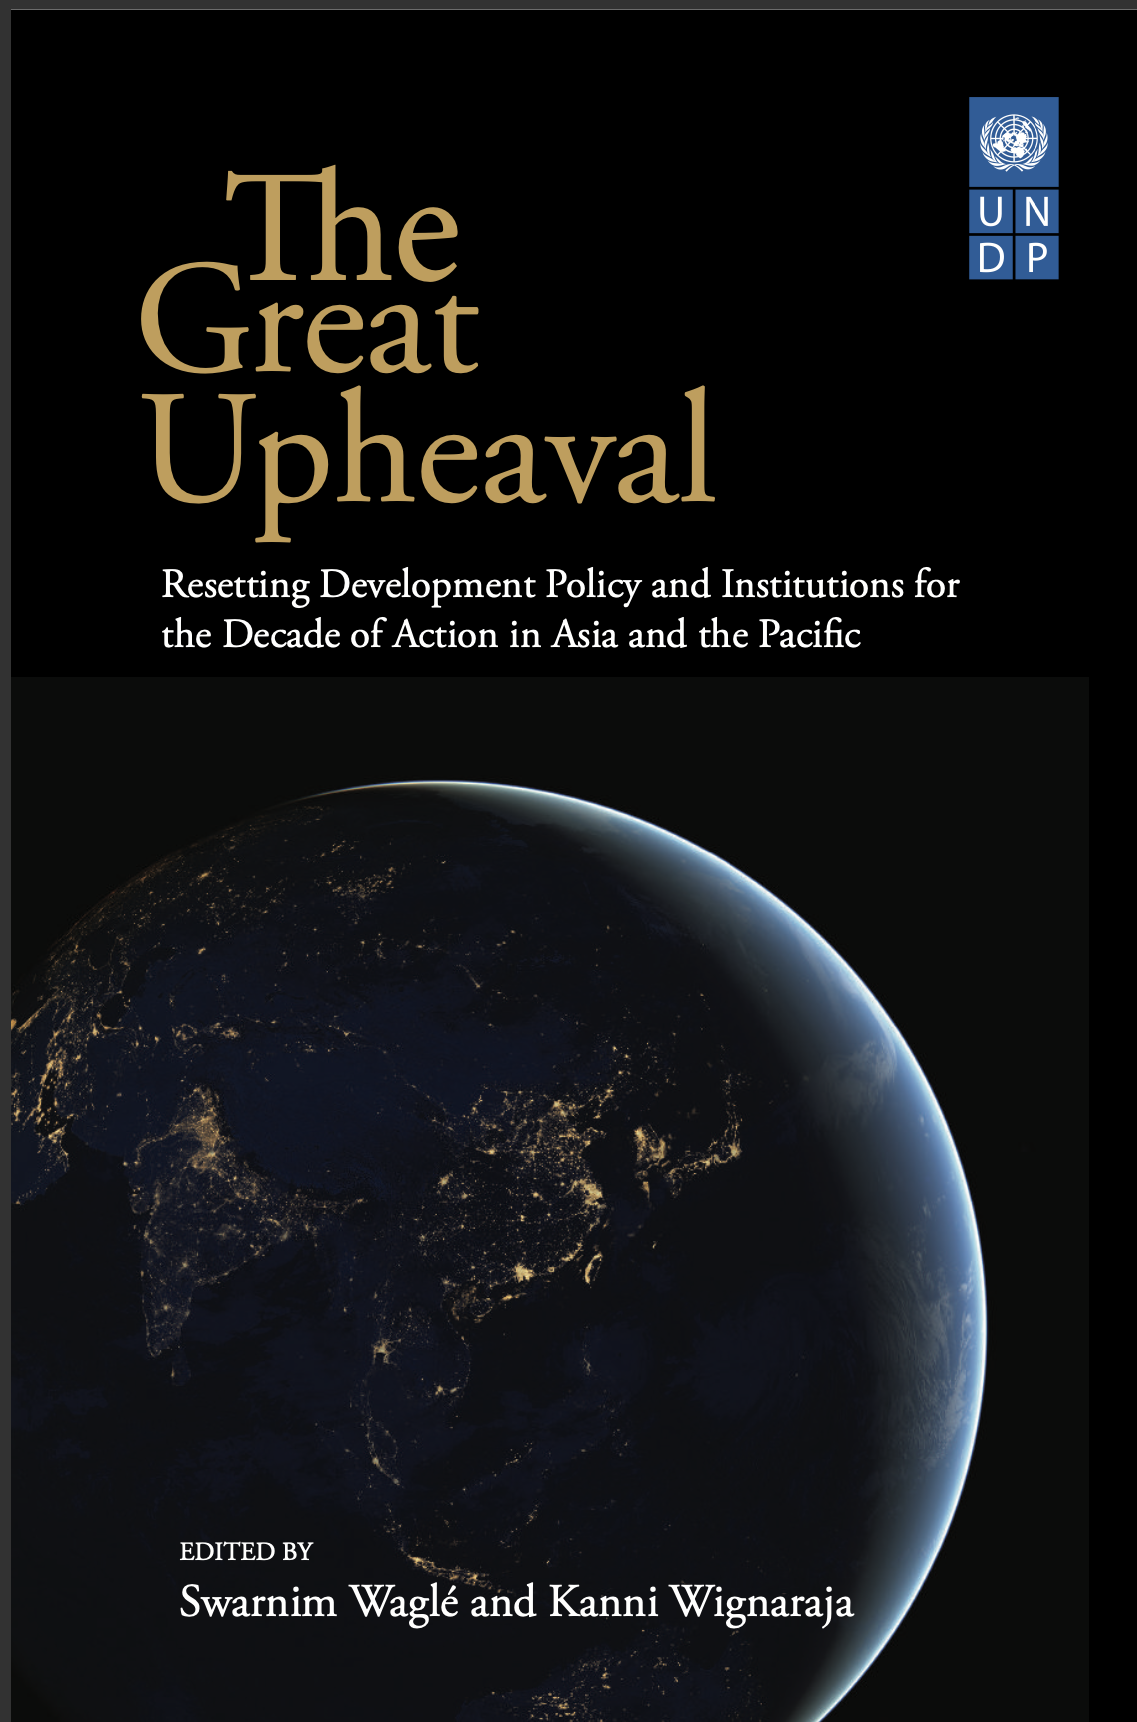 The Great Upheaval